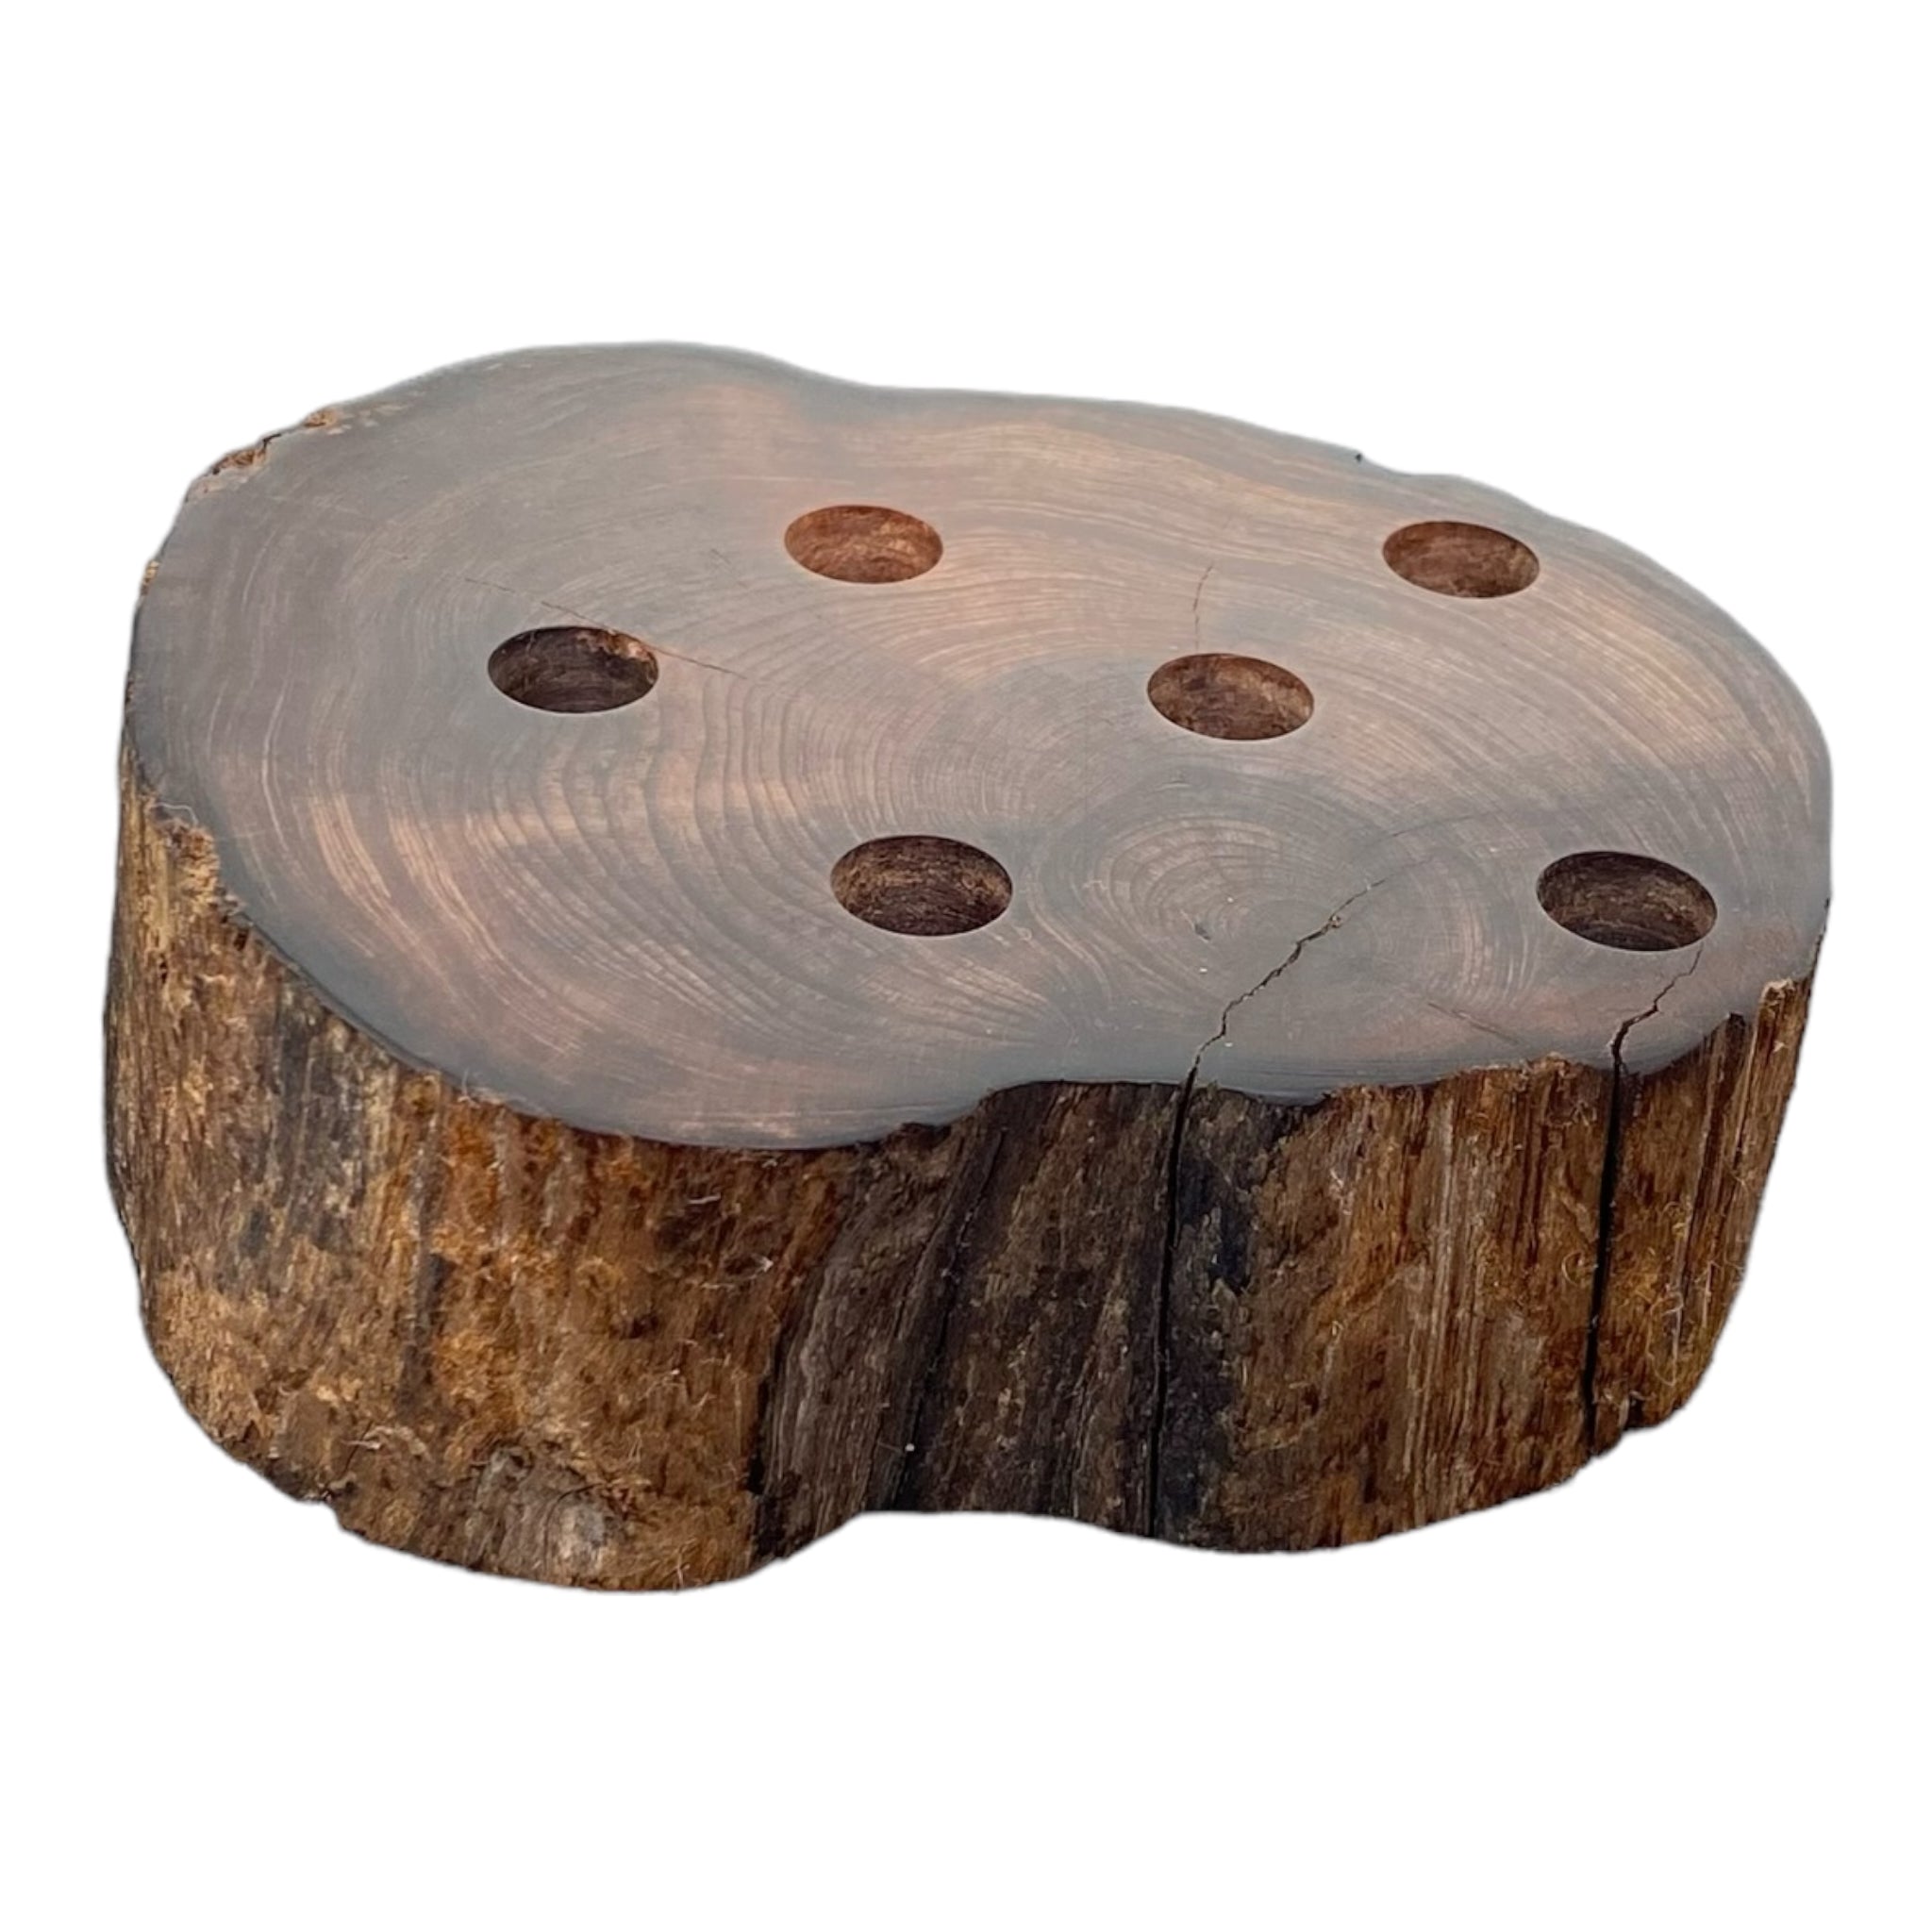 6 Hole Wood Display Stand Holder For 14mm Bong Bowl Pieces Or Quartz Bangers - Red Wood Burl With Live Edge